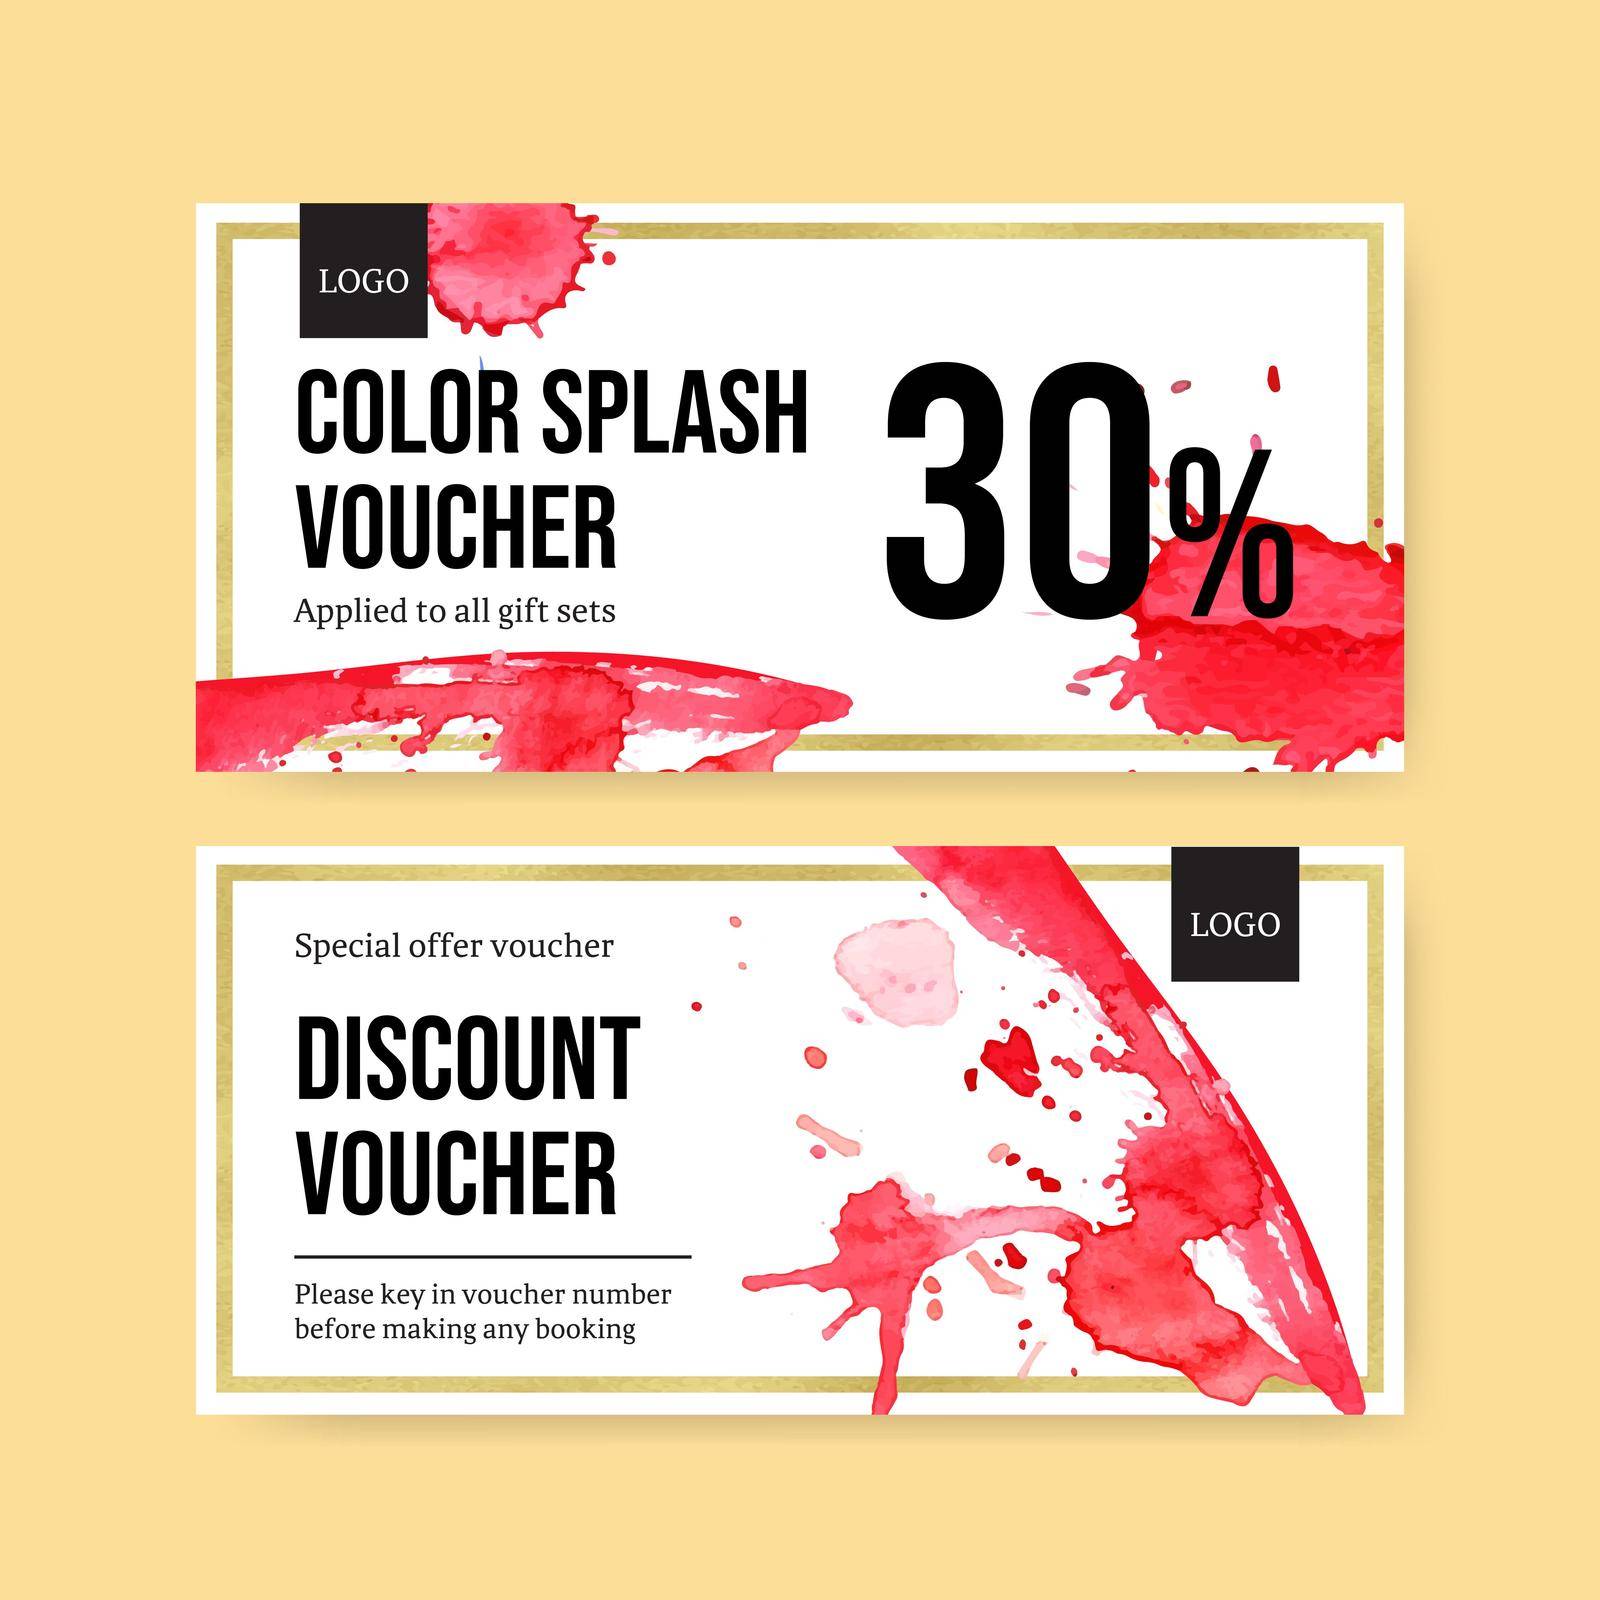 Splash color voucher design with red watercolor illustration. by Photographeeasia